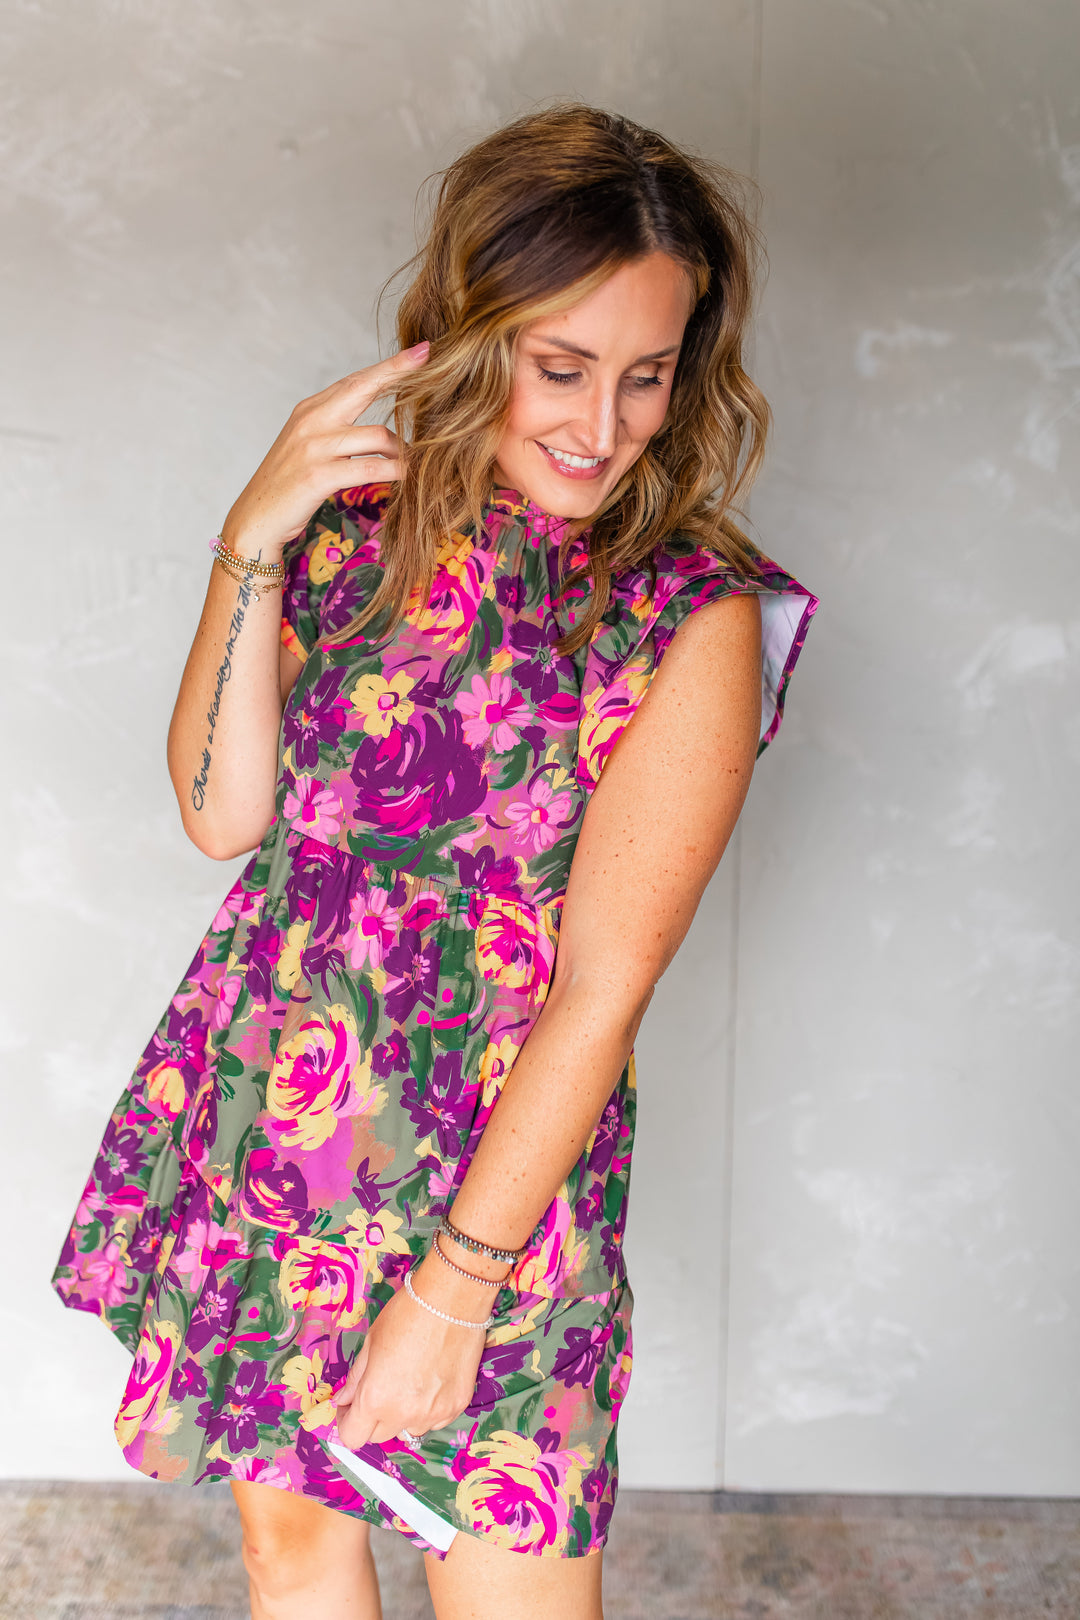 The Fall Floral Bloom Dress by THML